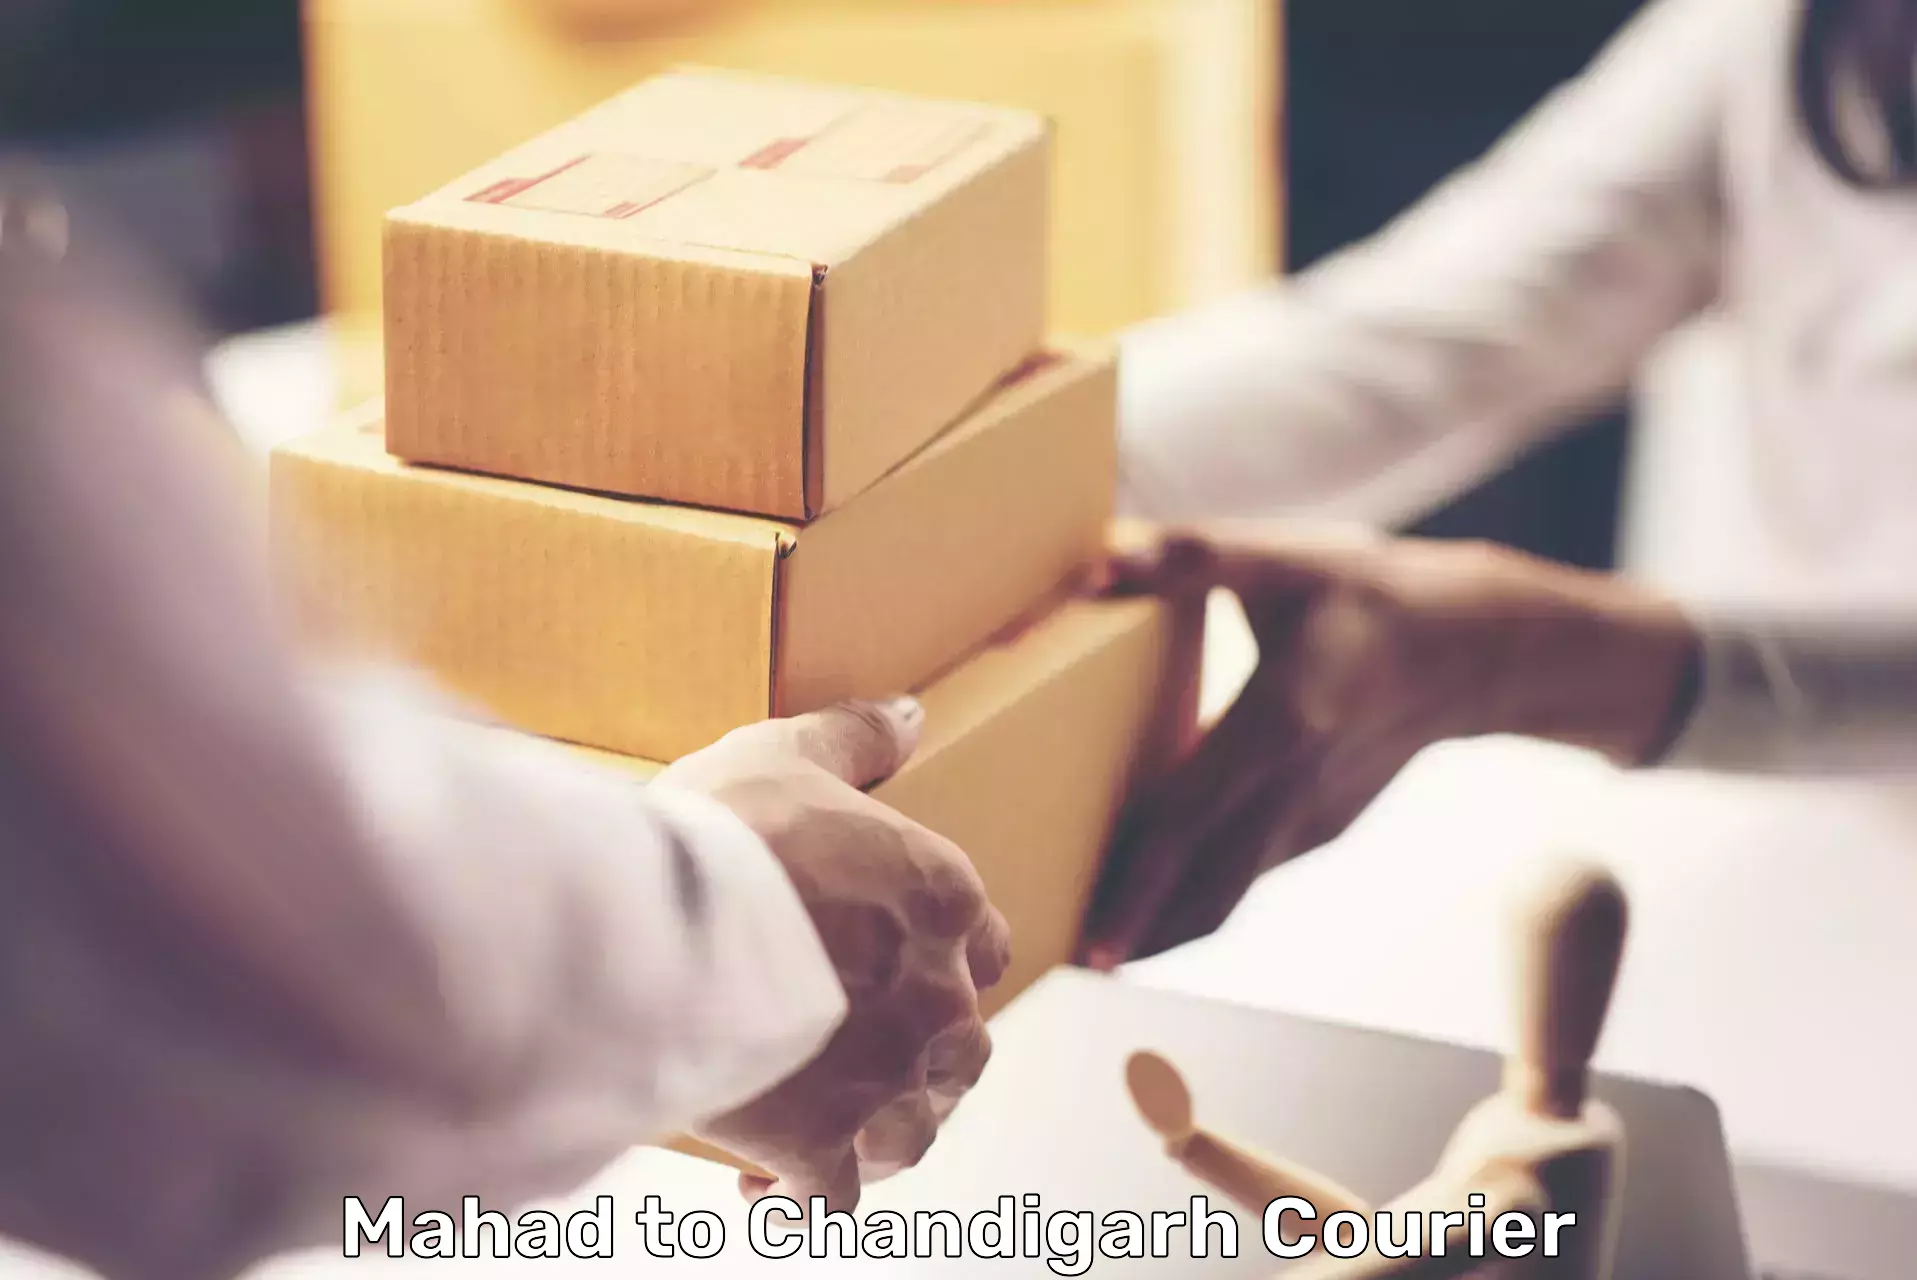 Cash on delivery service Mahad to Chandigarh